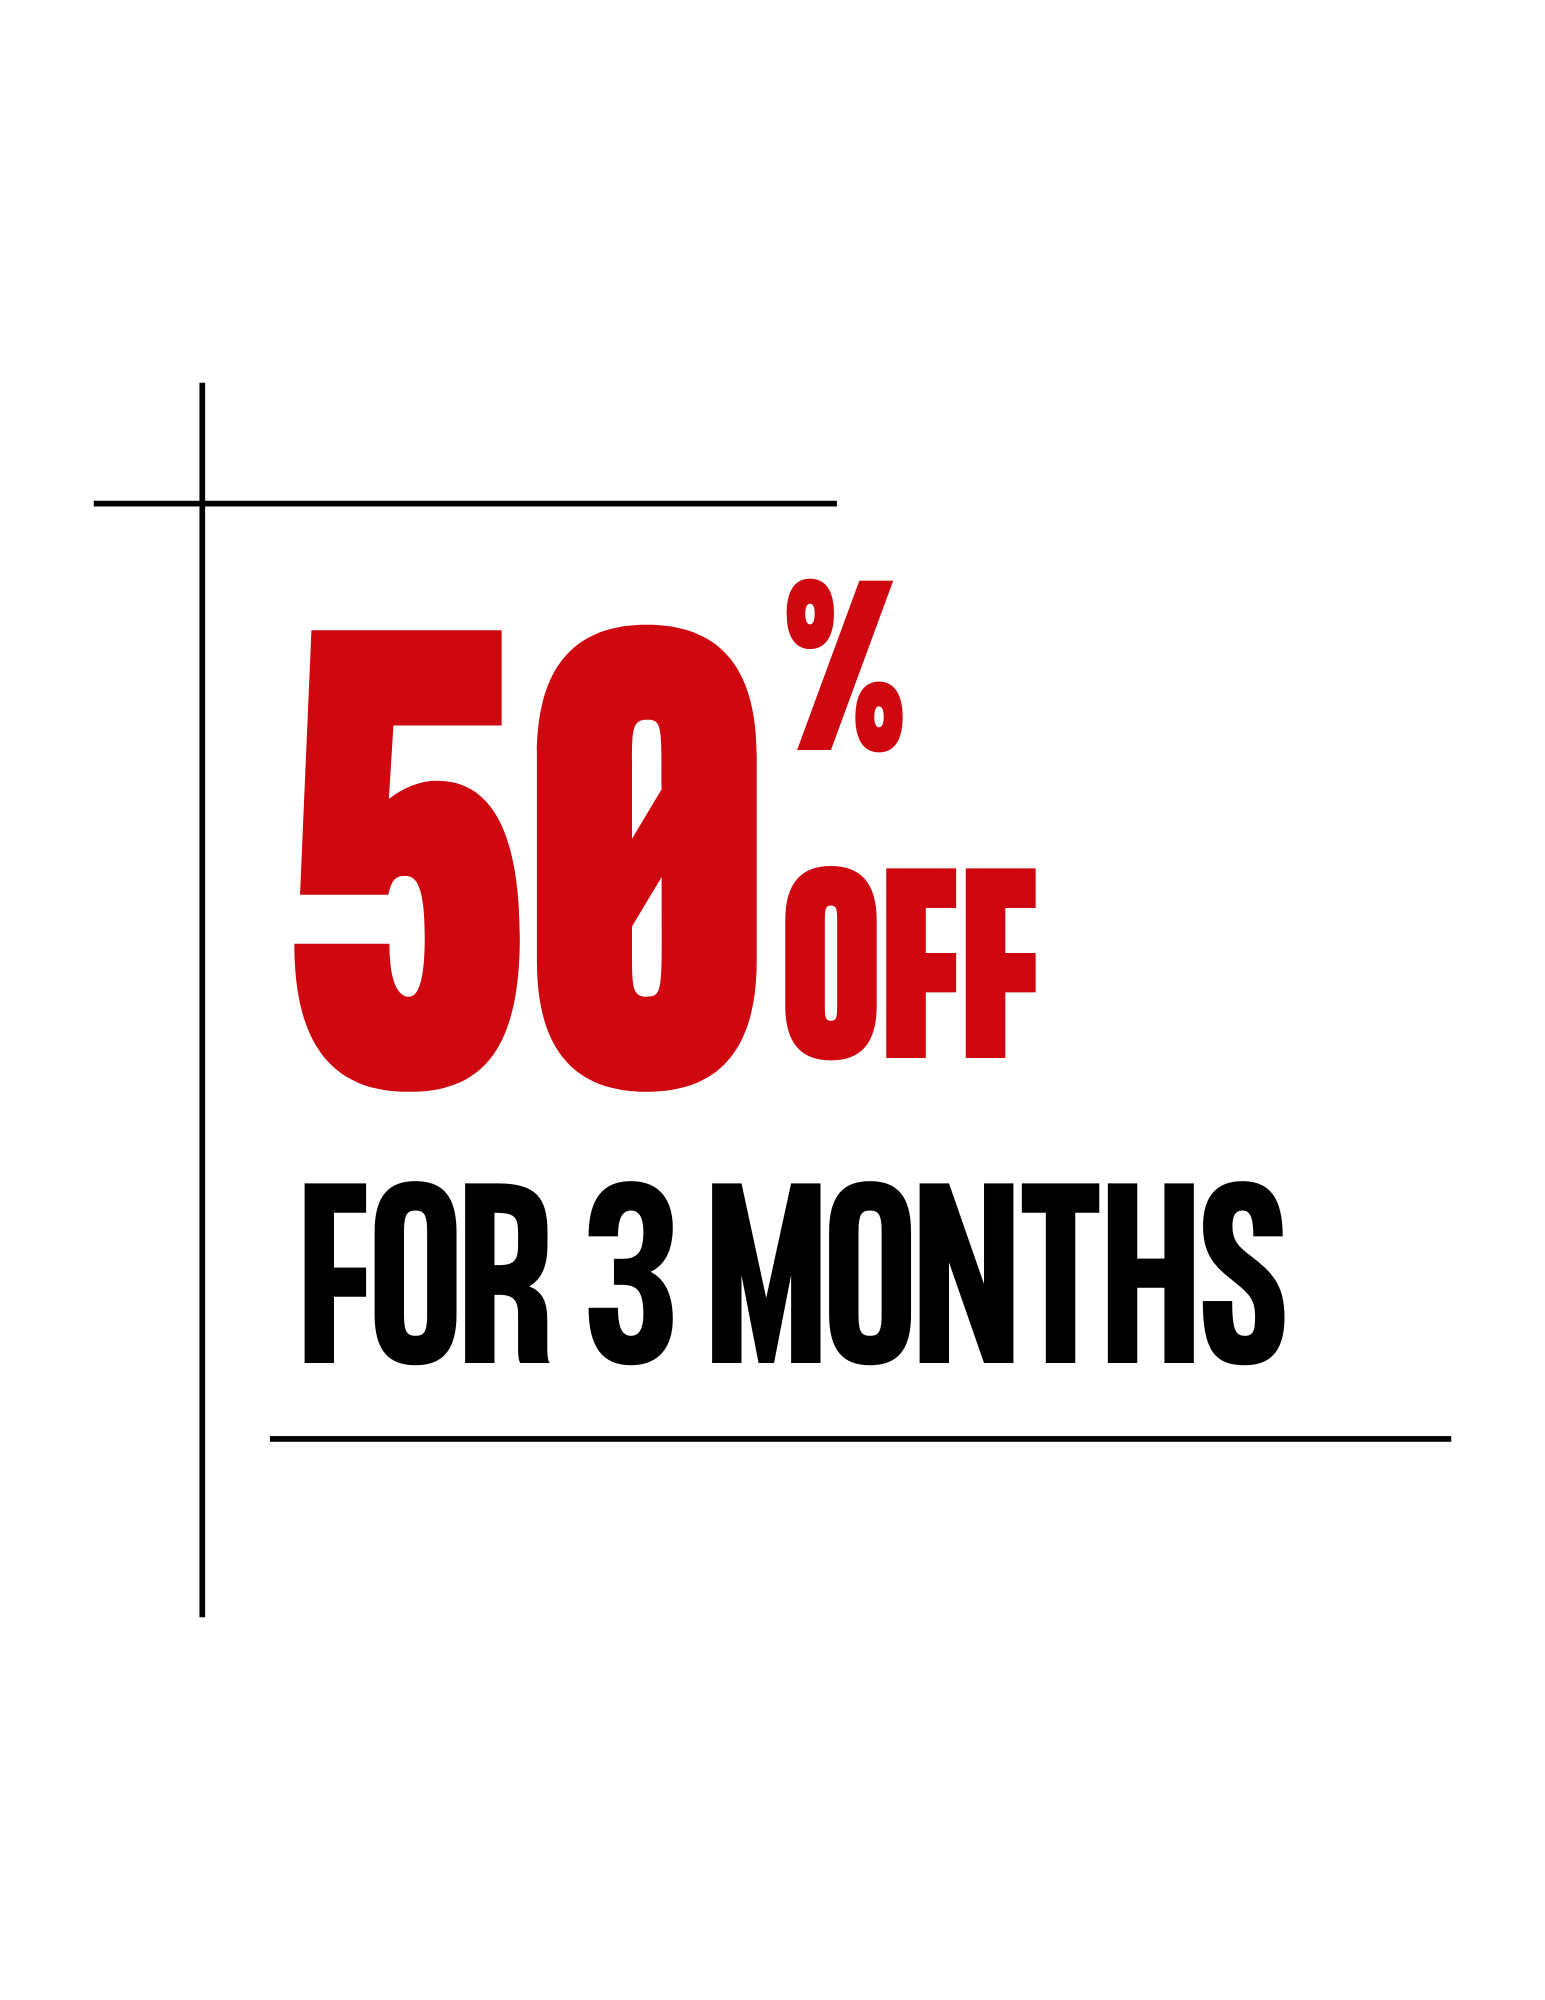 50% off 3 Months! *Certain restrictions apply, call for details.